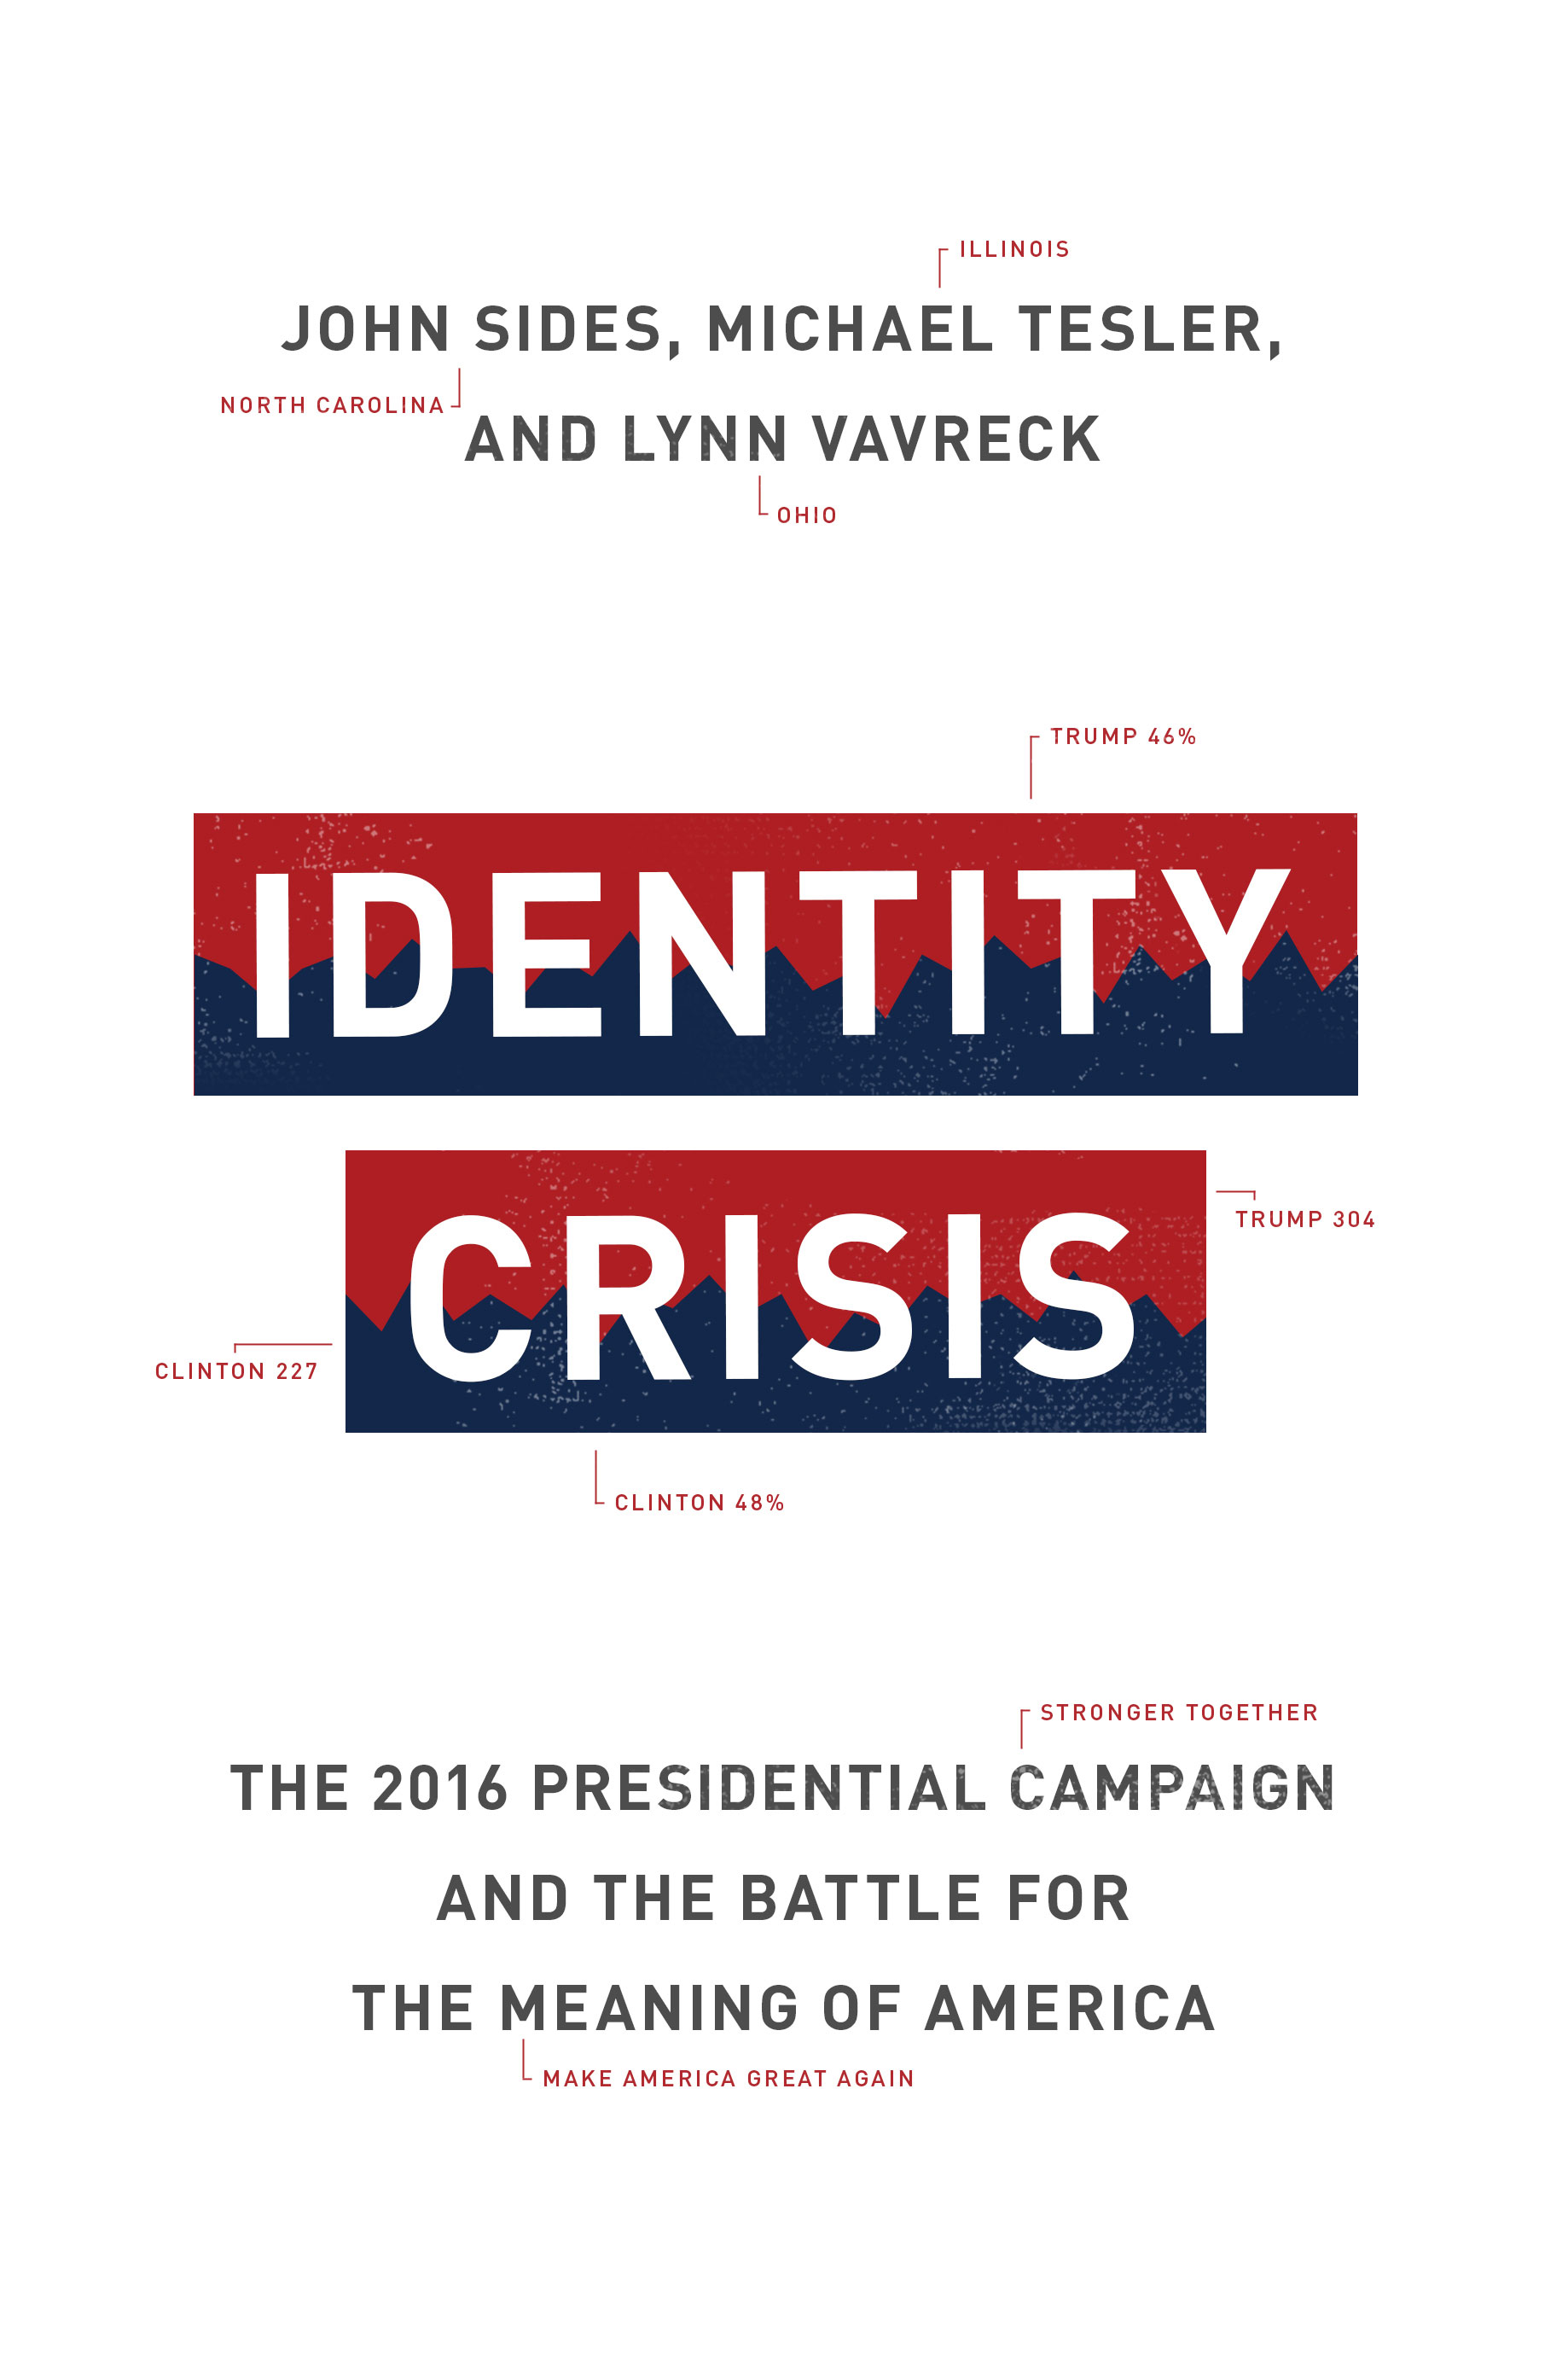 Photo of the bestseller "Identity Crisis"